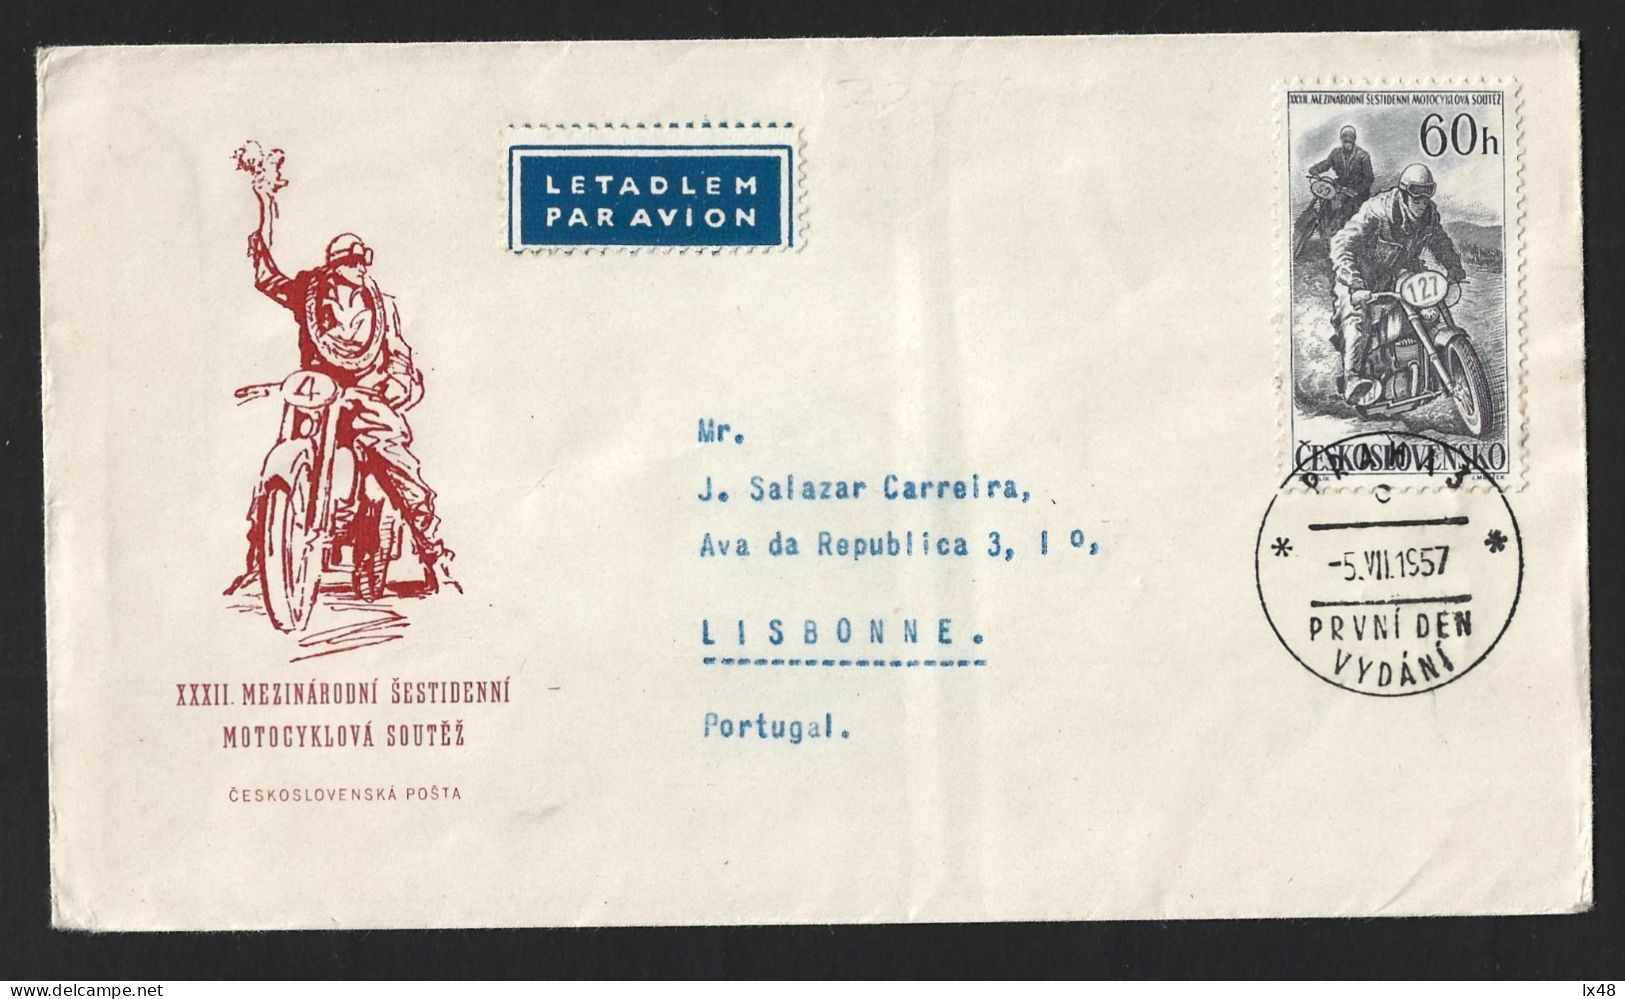 Moto Racing In Prague, Czechoslovakia. 32 1957 International Motorcycle Race. Motorcycles. Letter With Additional Ivan O - Motorbikes